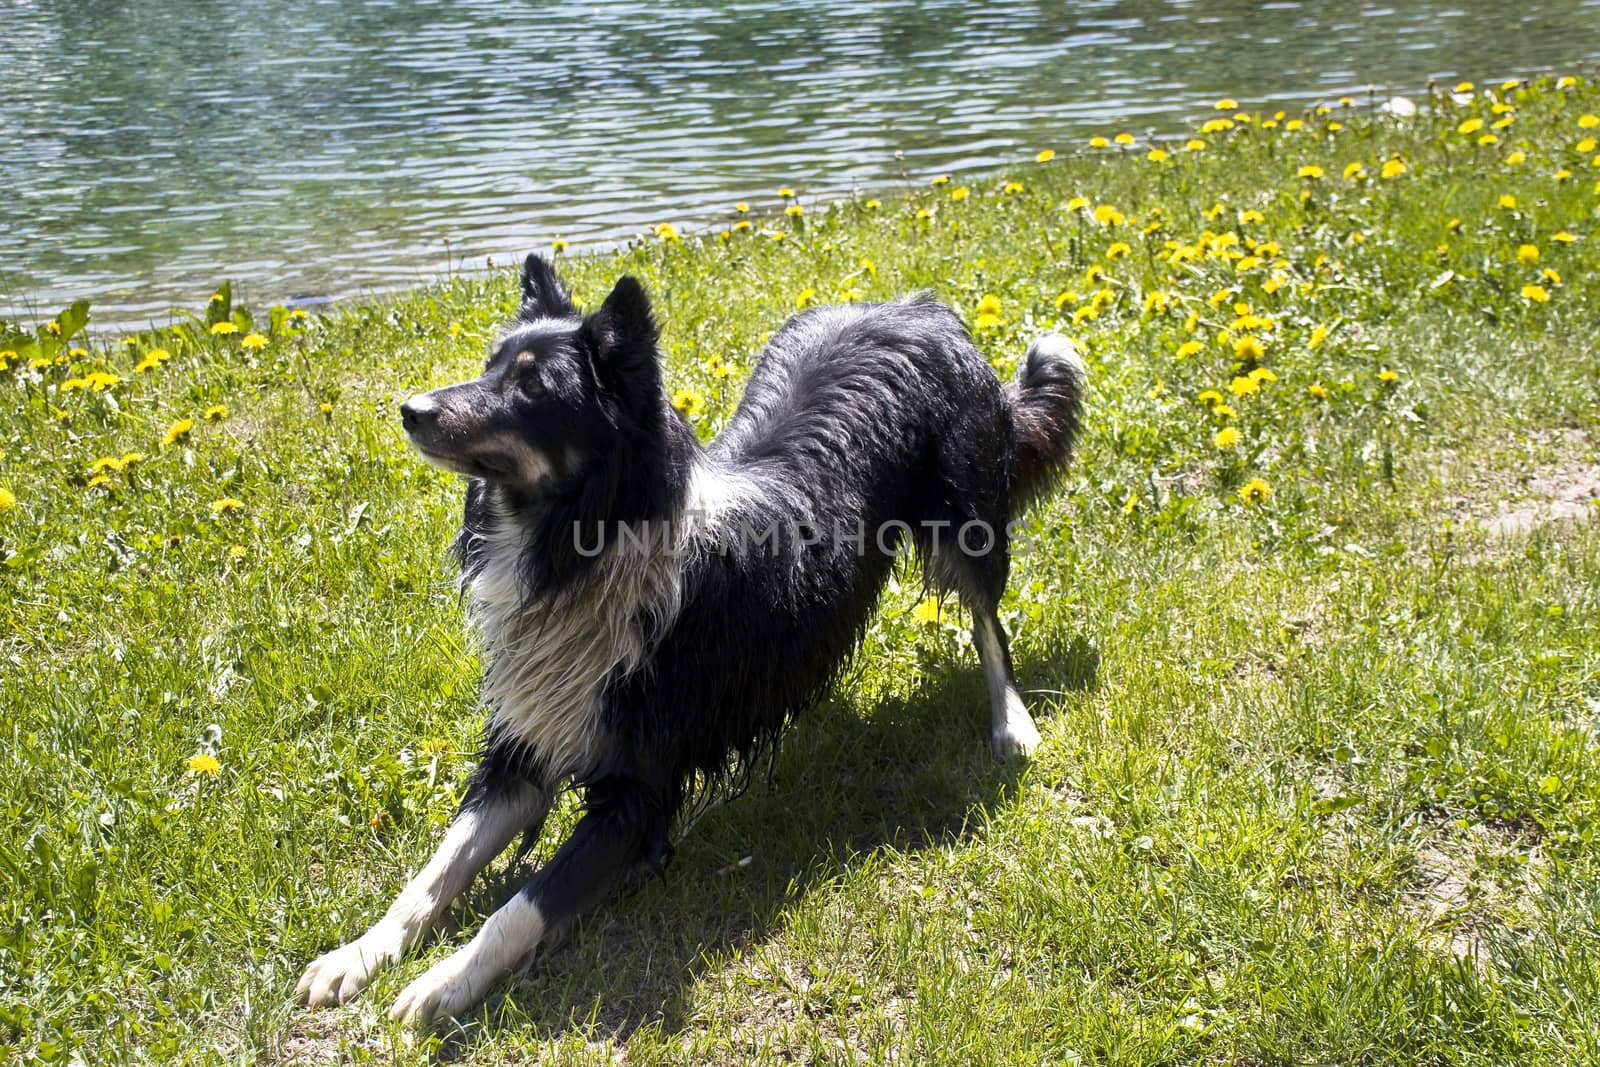 The playful dog by the lake